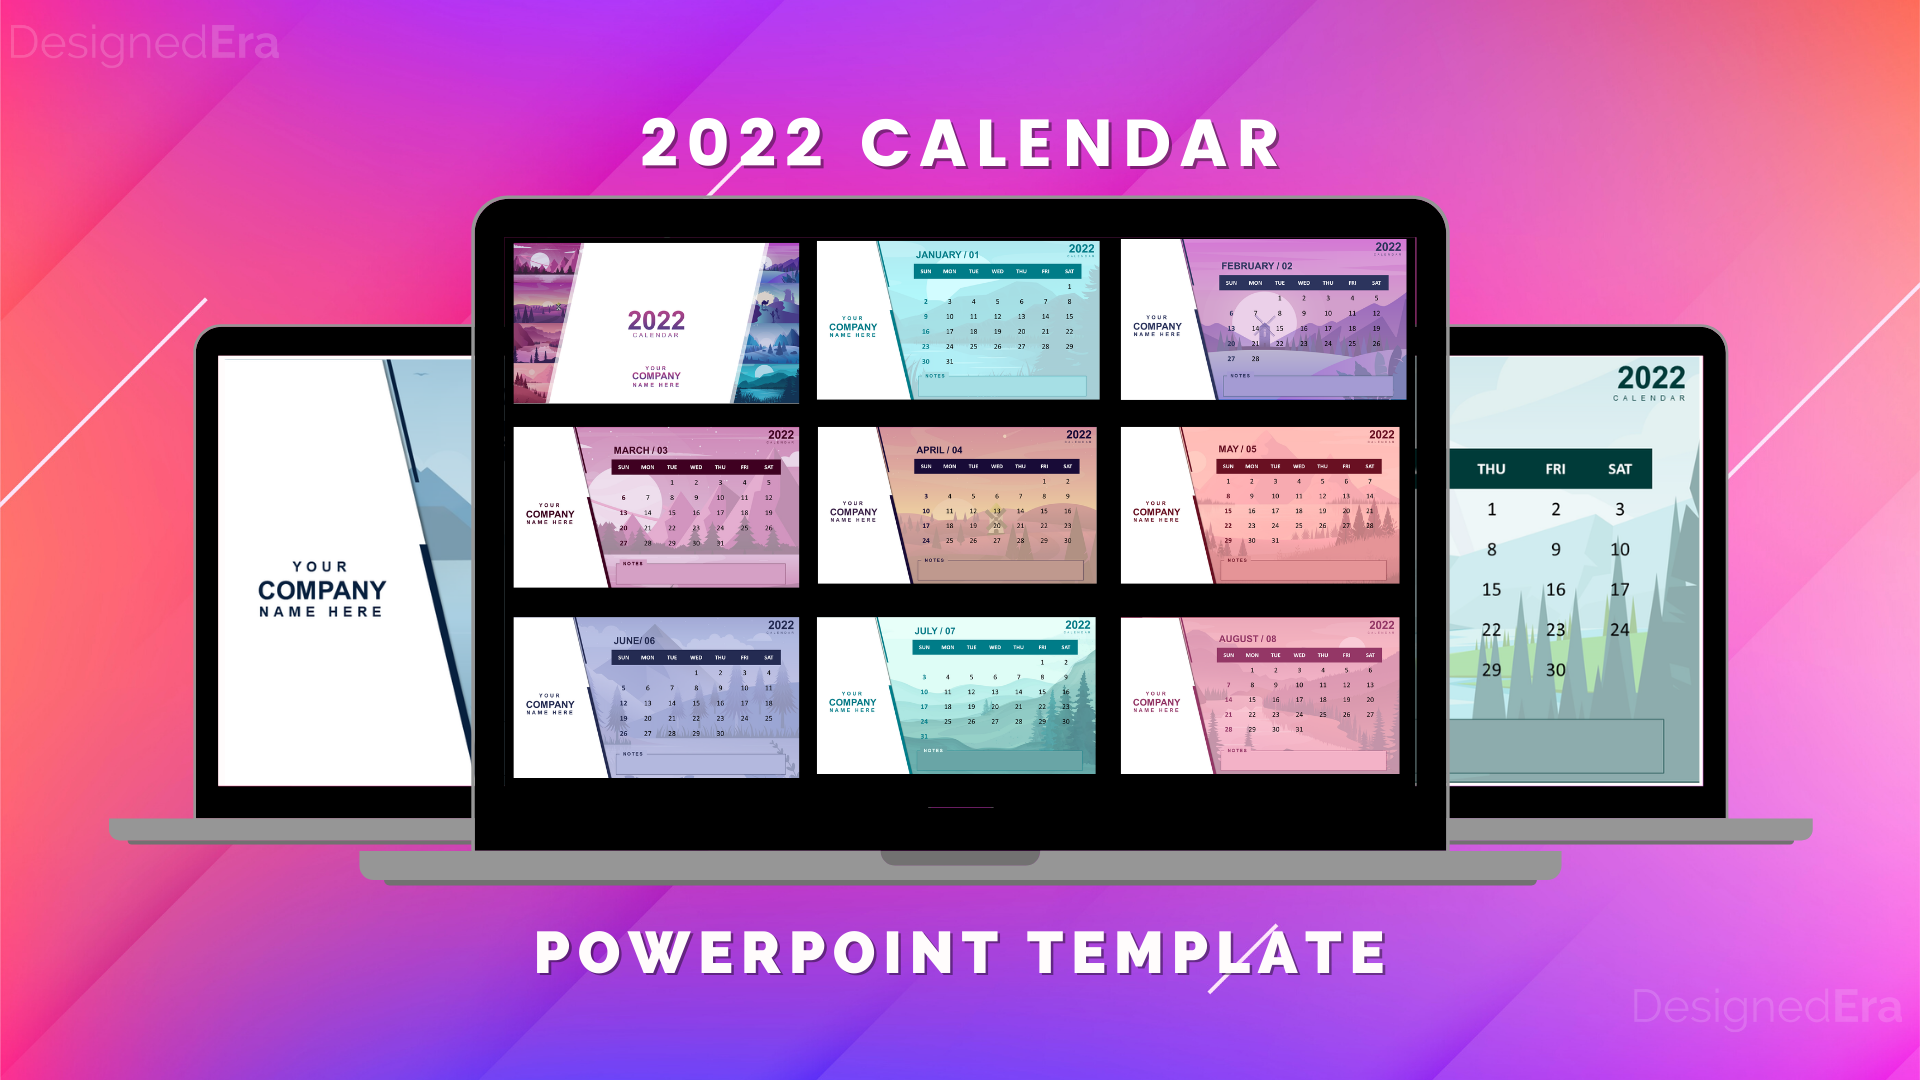 Powerpoint Template Free Download 2022